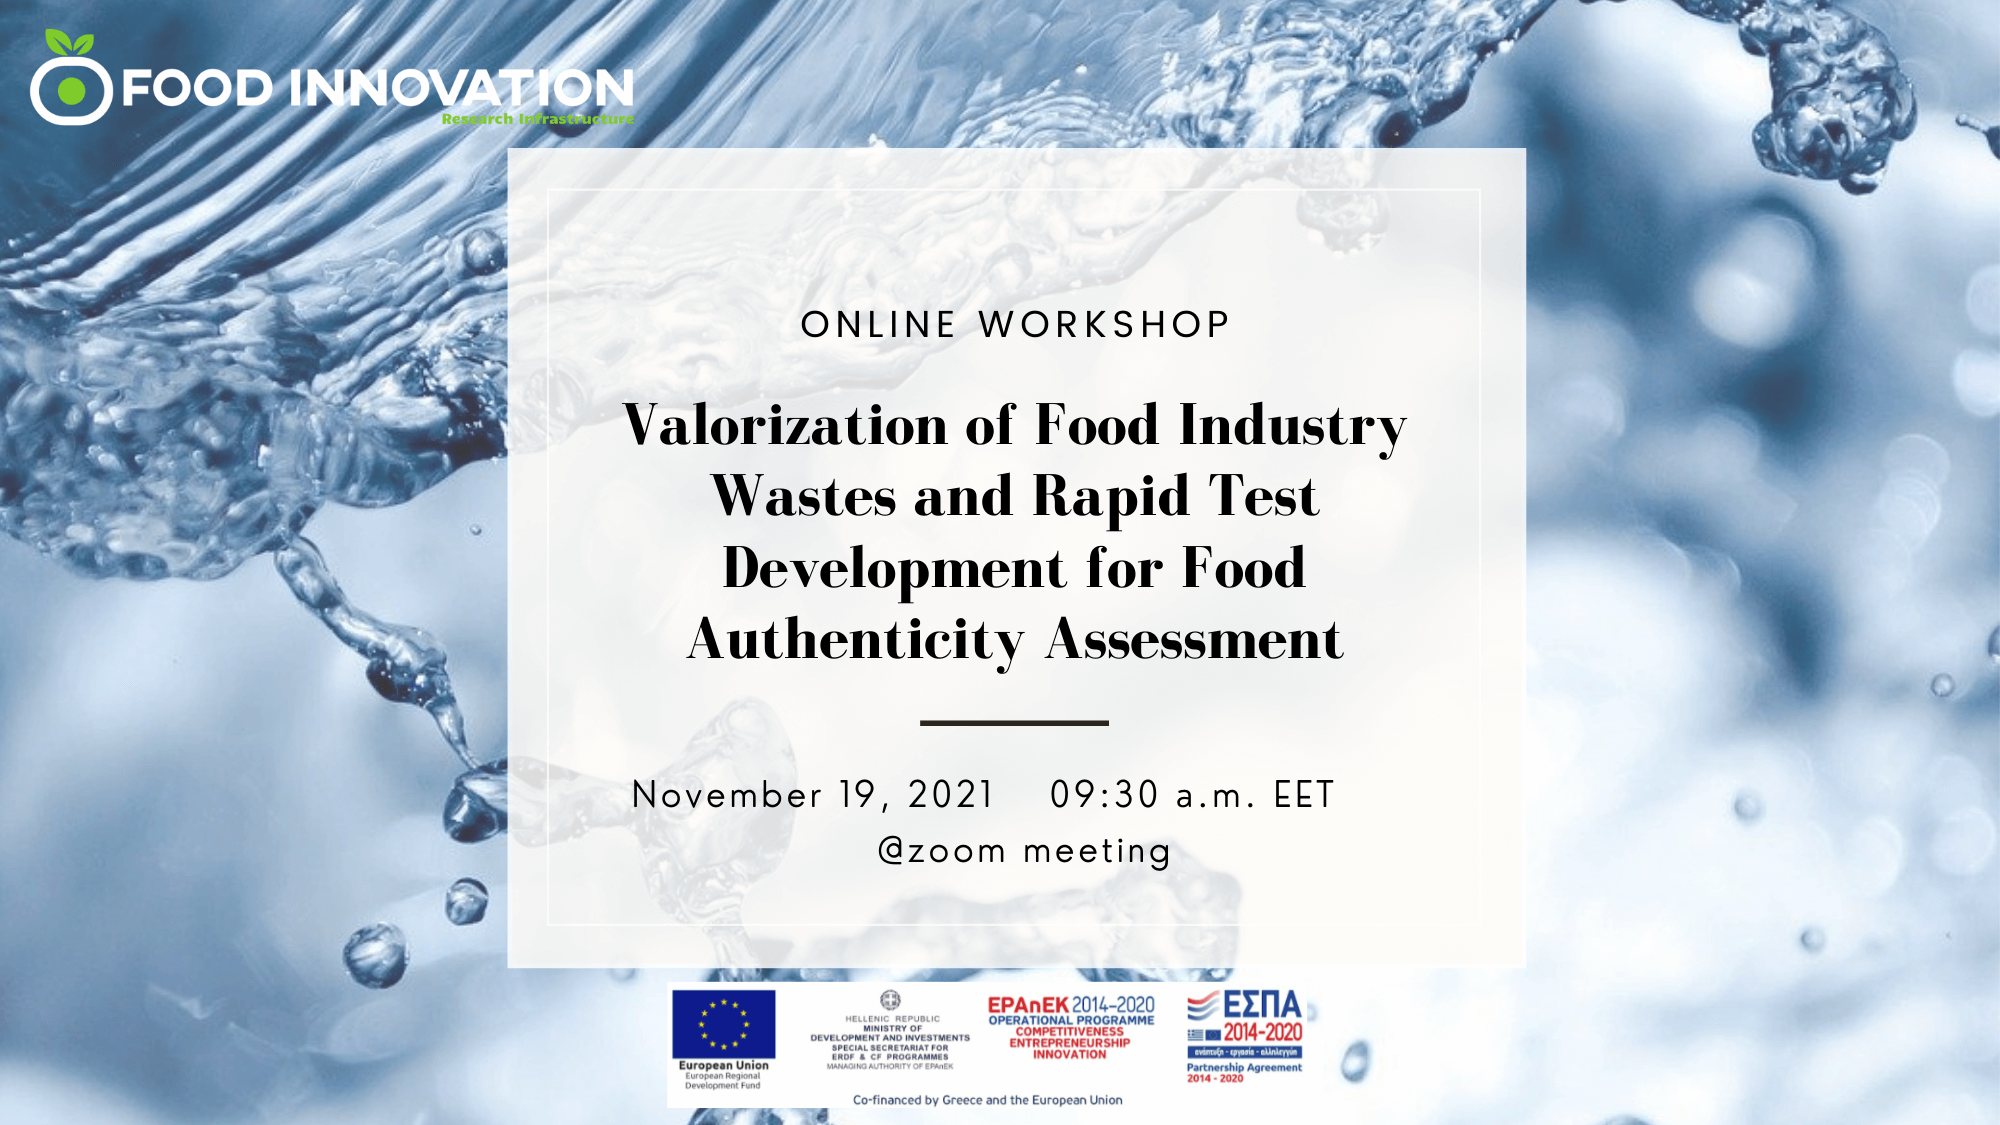 An Online Workshop on Valorization of Food Industry Wastes and Rapid Test Development for Food Authenticity Assessment